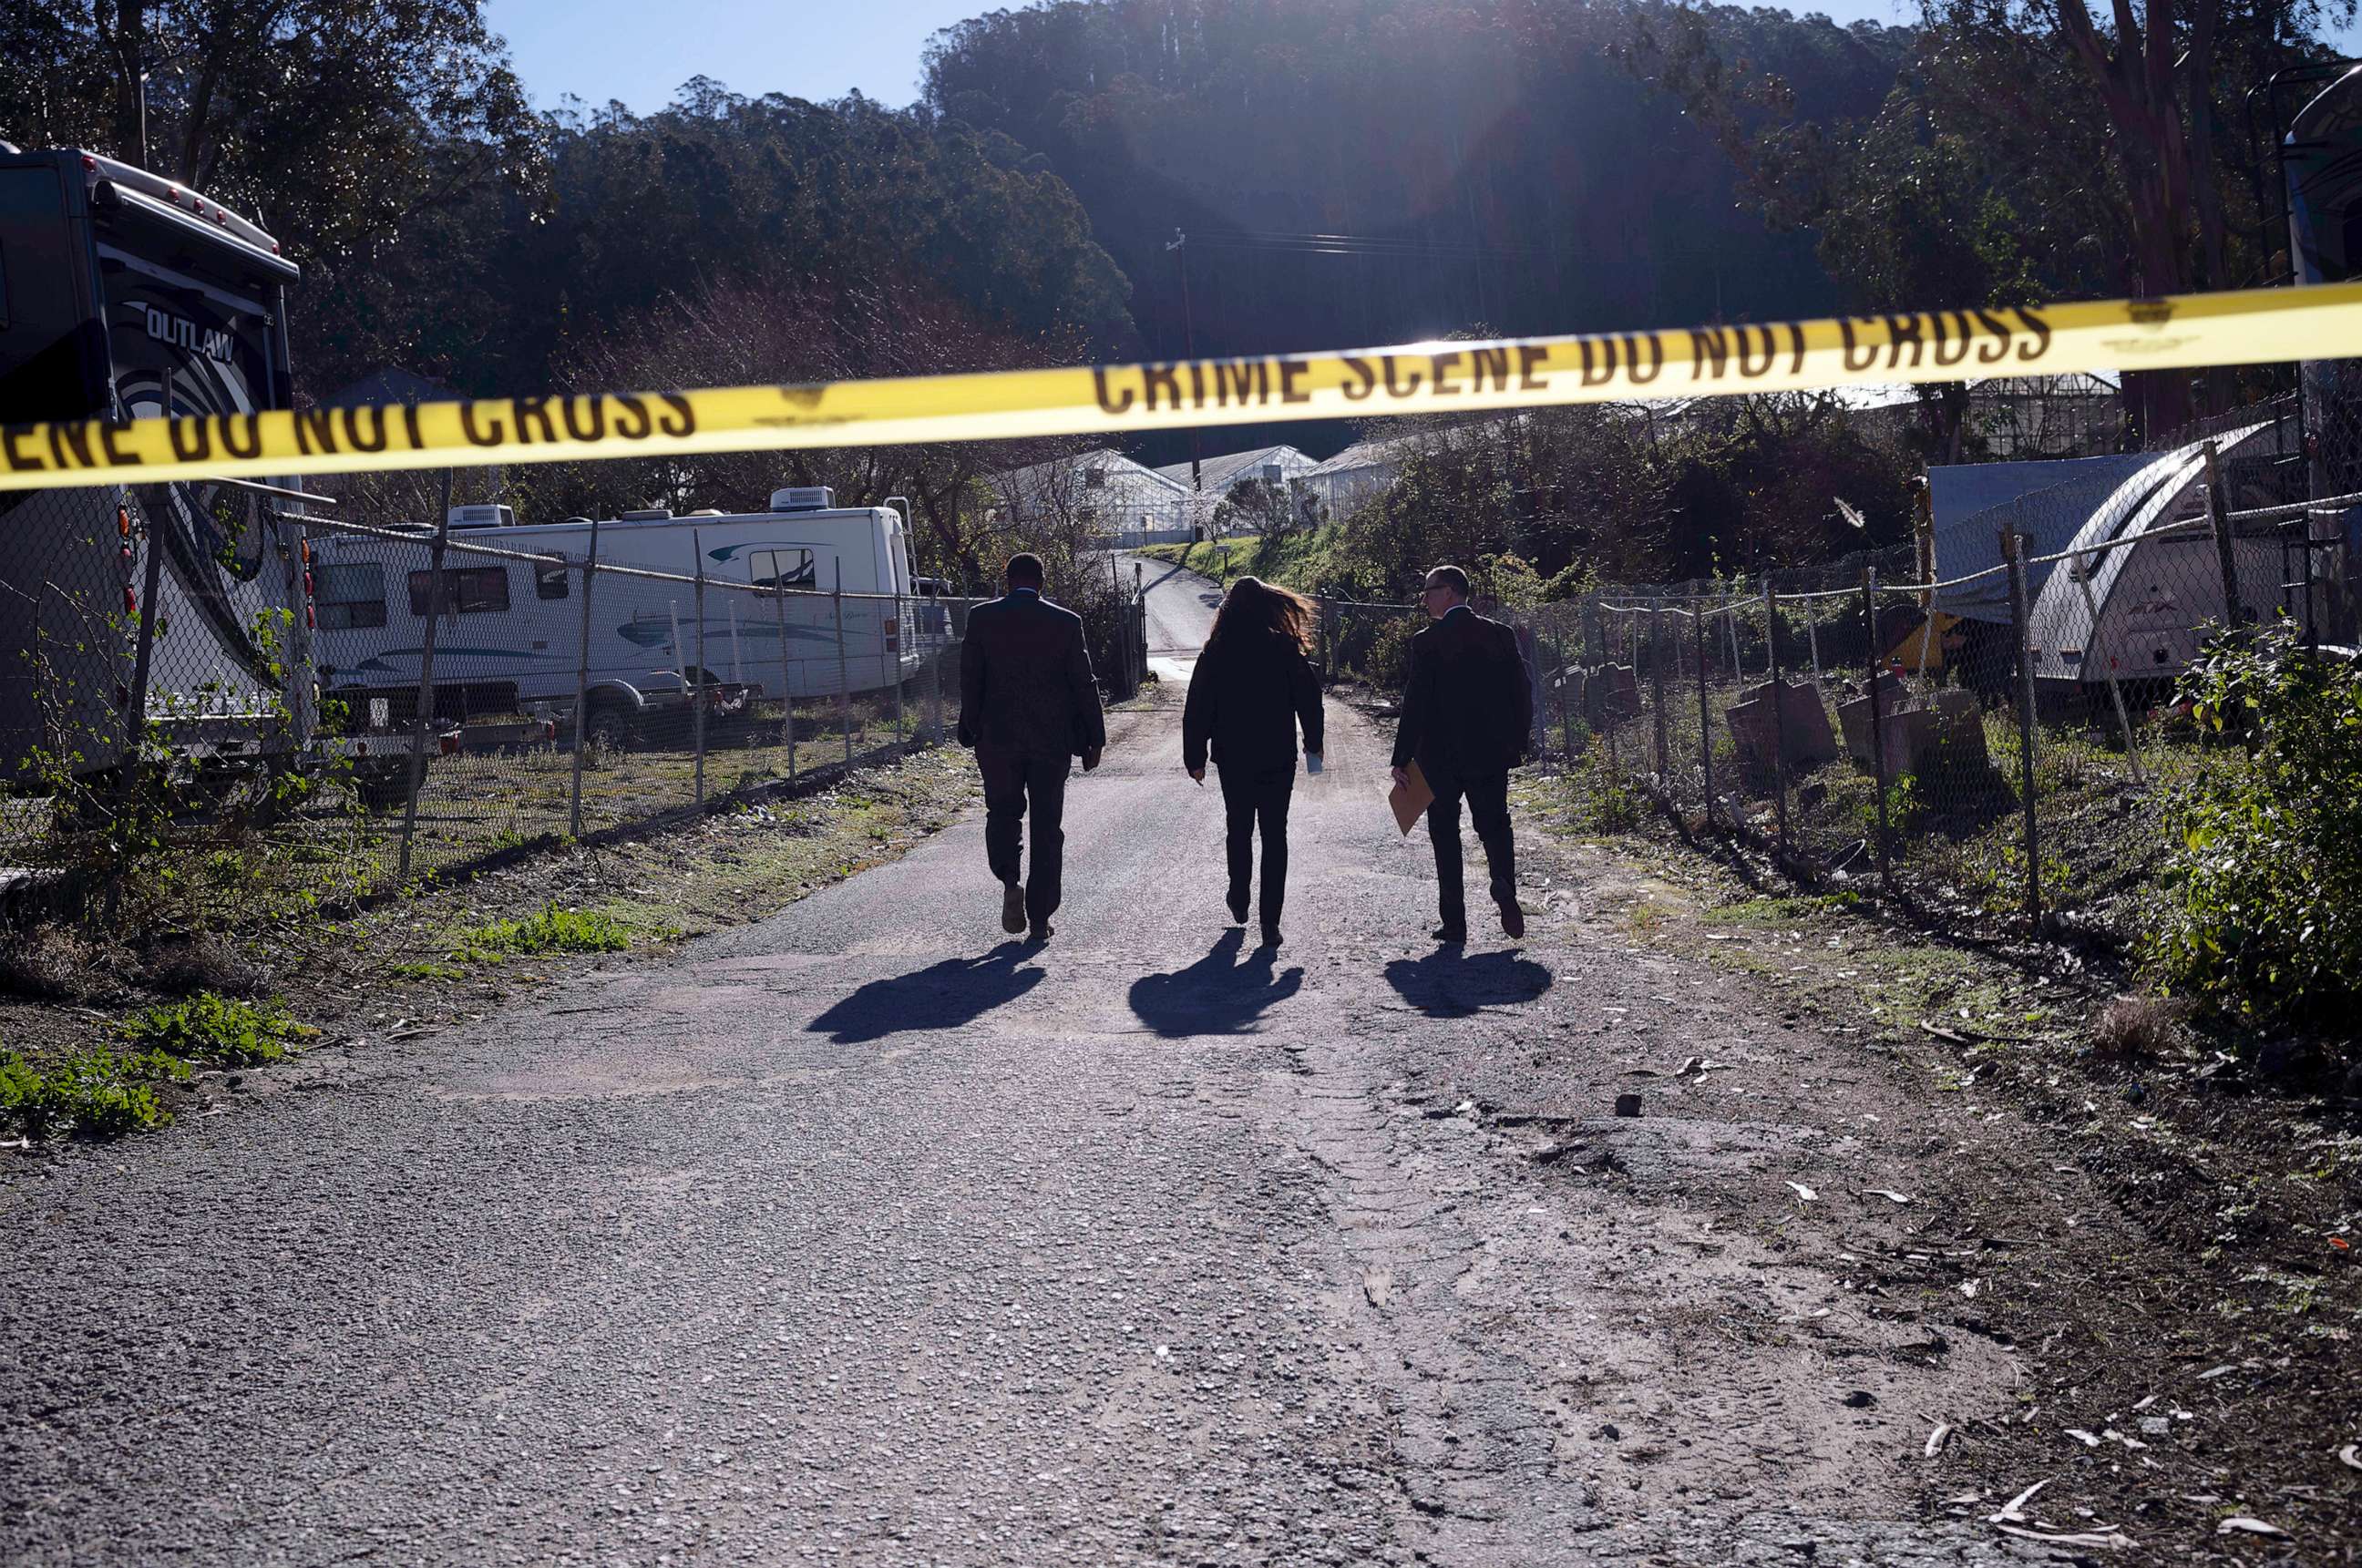 PHOTO: FBI officials walk towards from the crime scene at Mountain Mushroom Farm, Jan. 24, 2023, after a gunman killed several people at two agricultural businesses in Half Moon Bay, Calif.